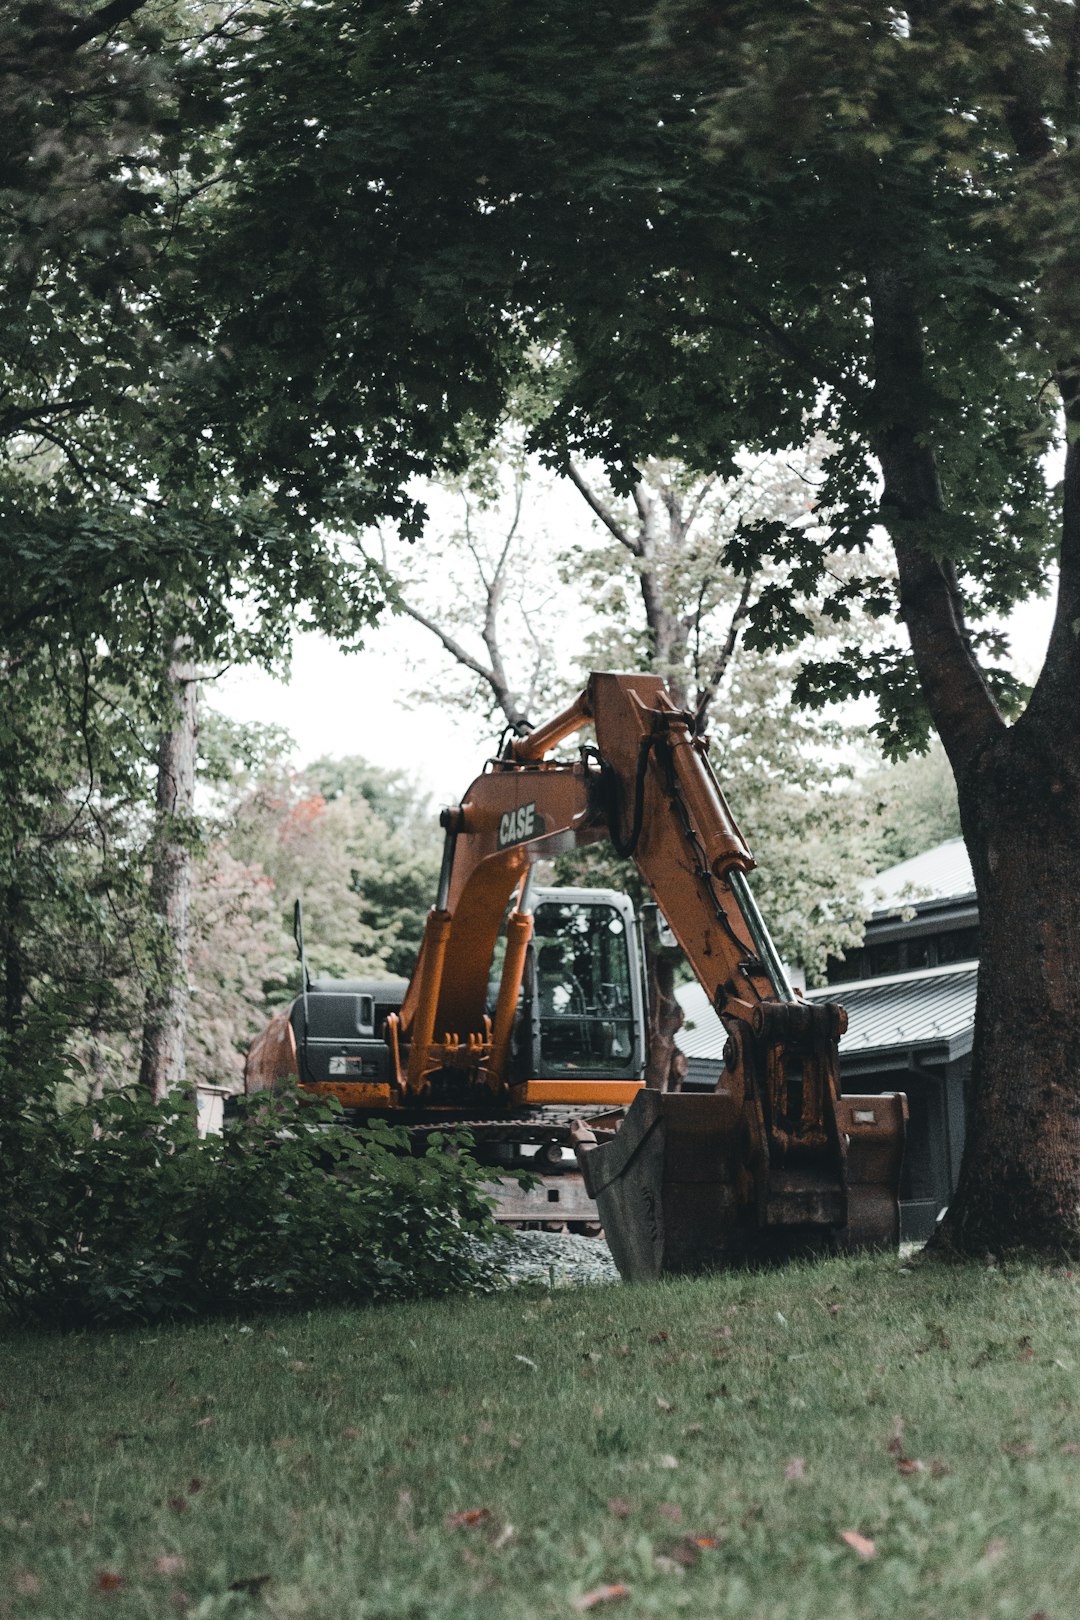 yellow and black excavator near green trees during daytime